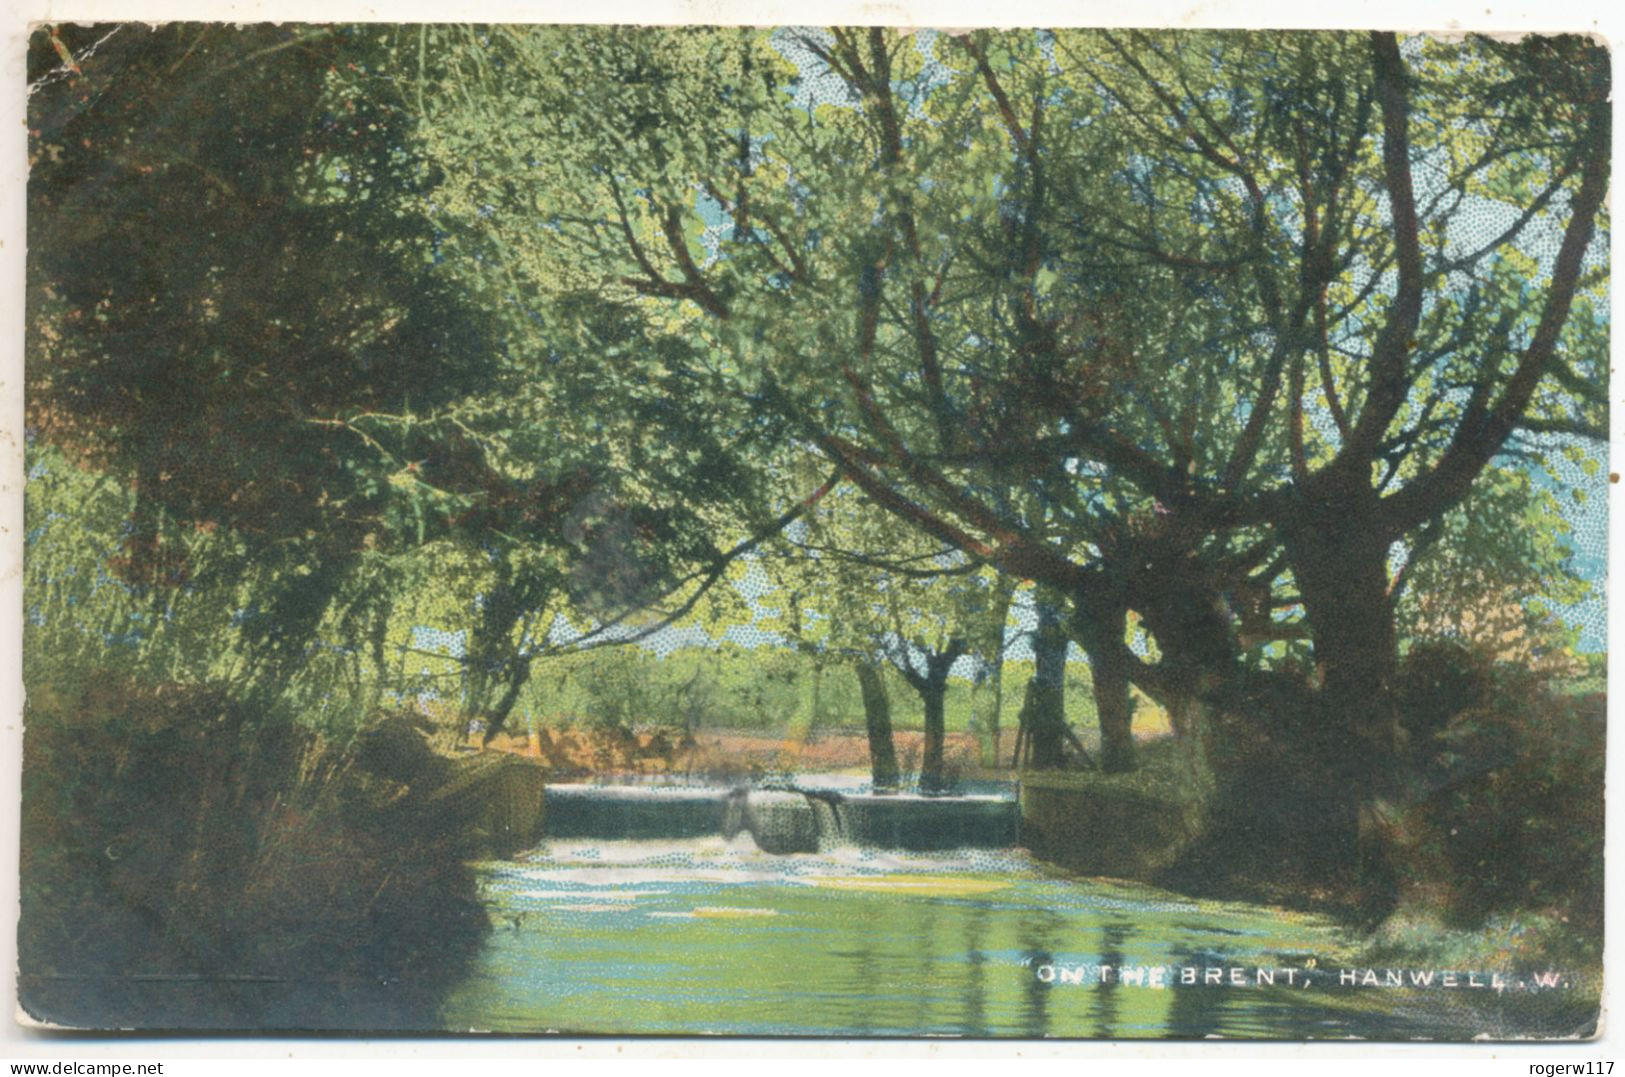 On The Brent, Hanwell, W., 1906 Postcard - Middlesex